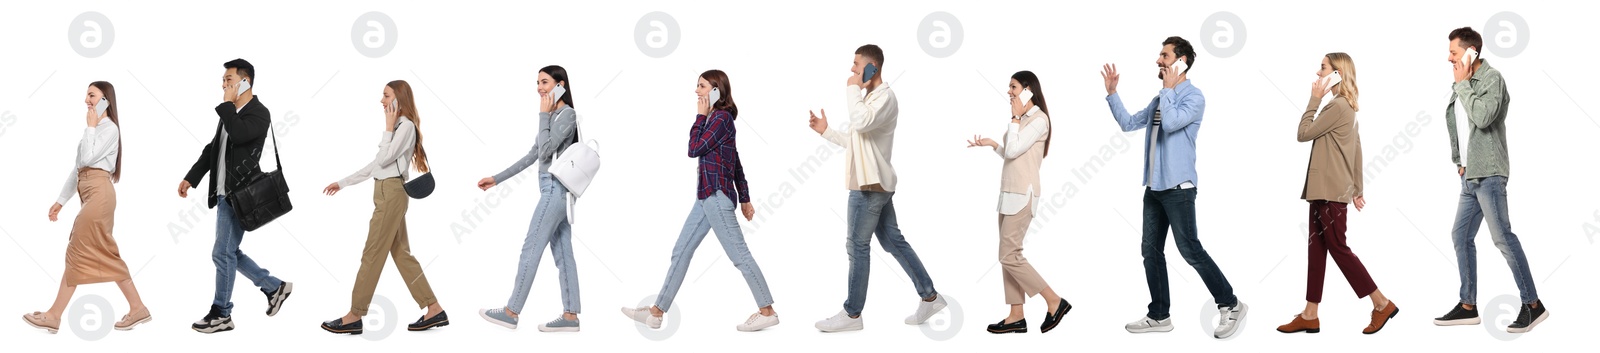 Image of Collage with photos of people wearing stylish outfit walking on white background. Banner design